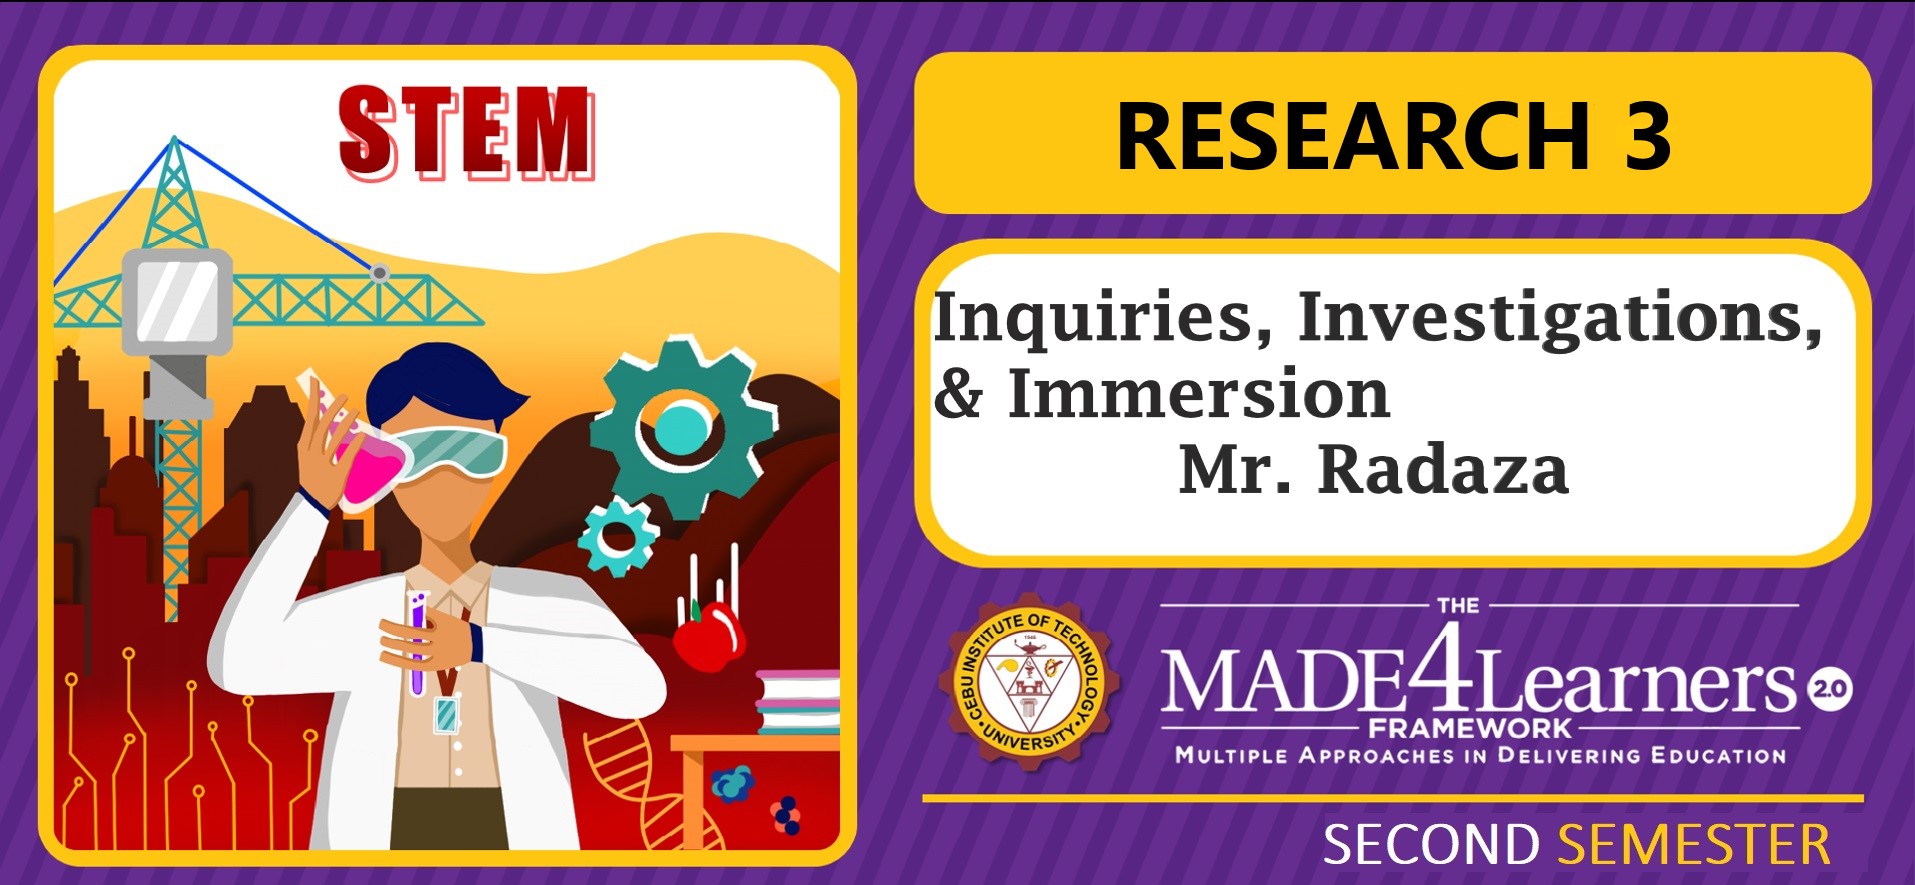 RES3: Research Inquiries, Investigation and Immersion (Radaza)